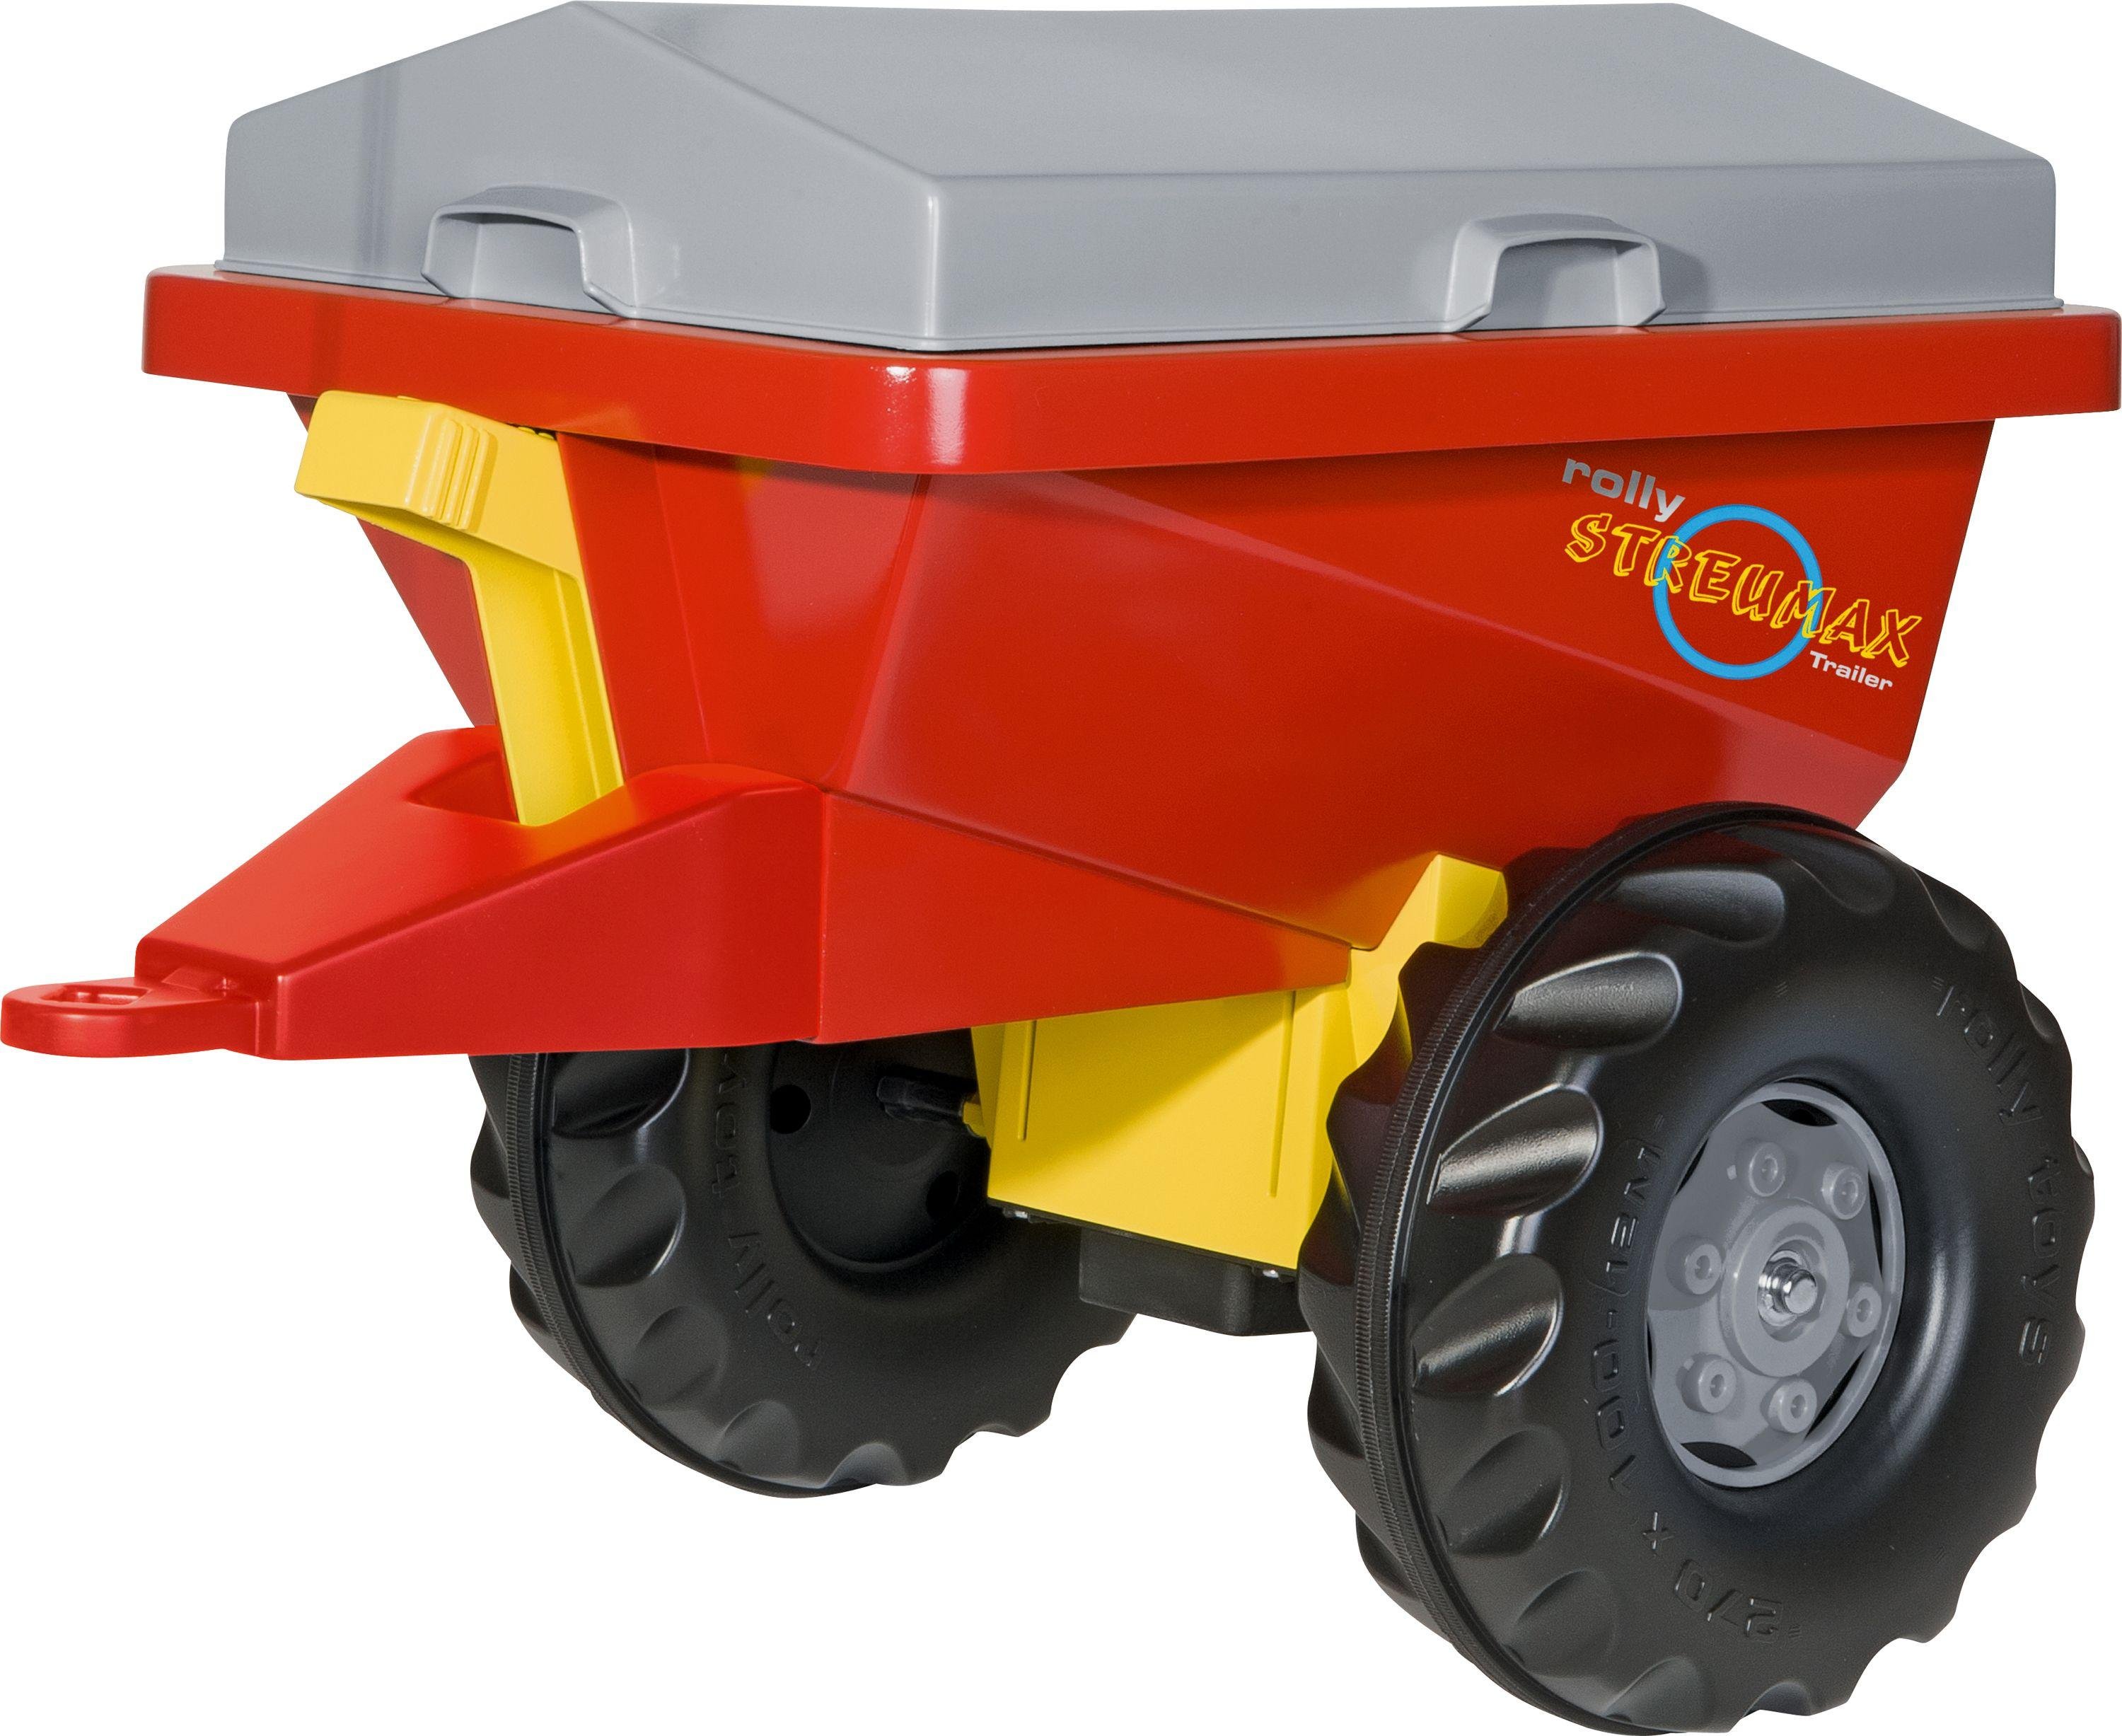 Red Spreader for Child's Tractor. Review